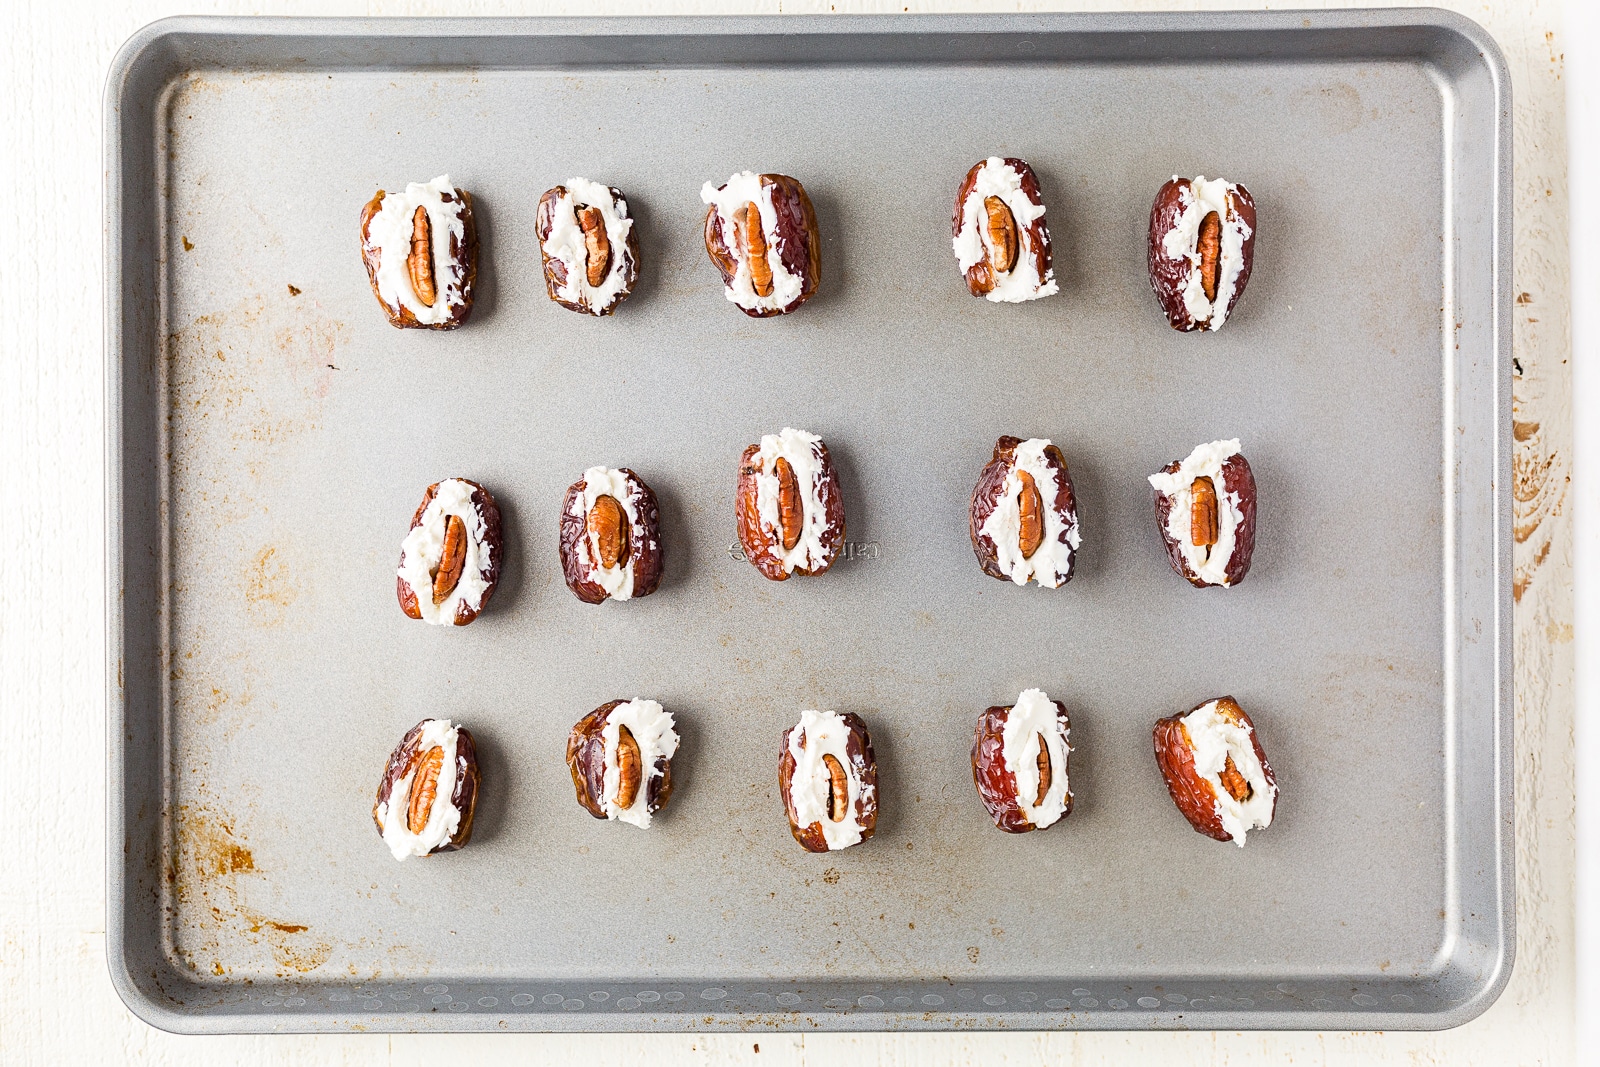 pecans stuffed inside dates with goat cheese on a baking pan